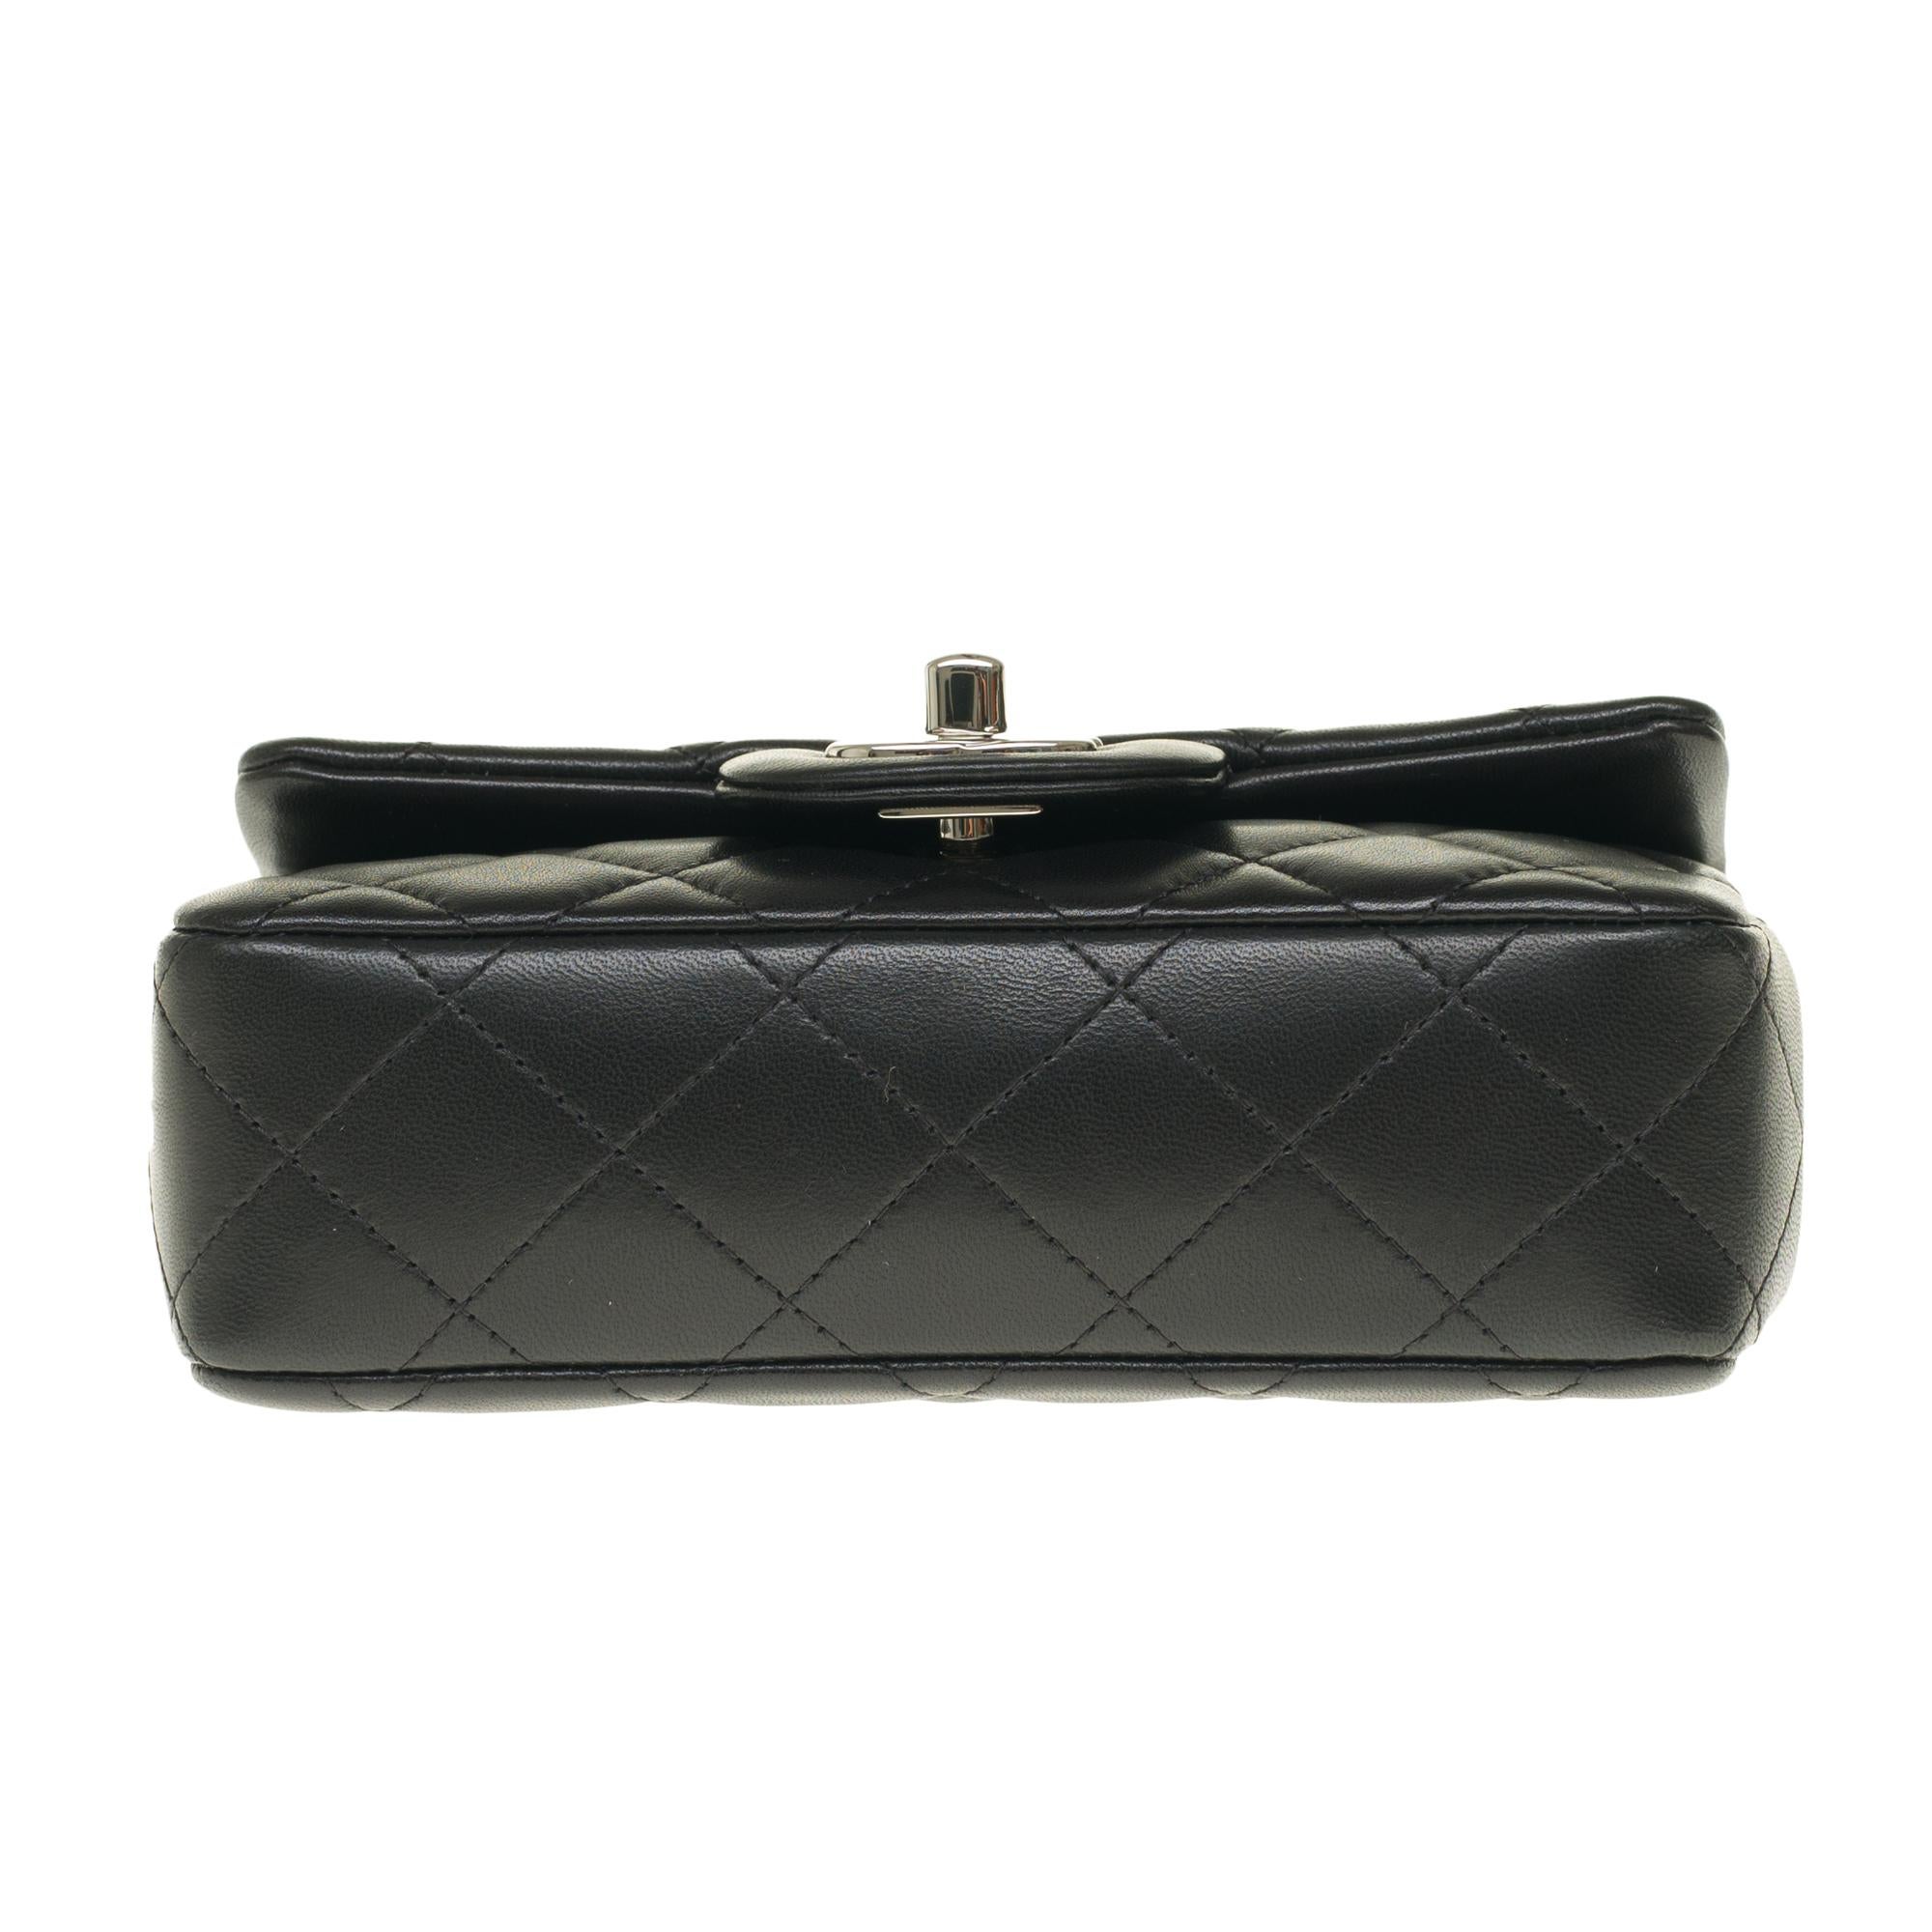 Chanel Mini square handbag in black quilted leather, Silver hardware 2